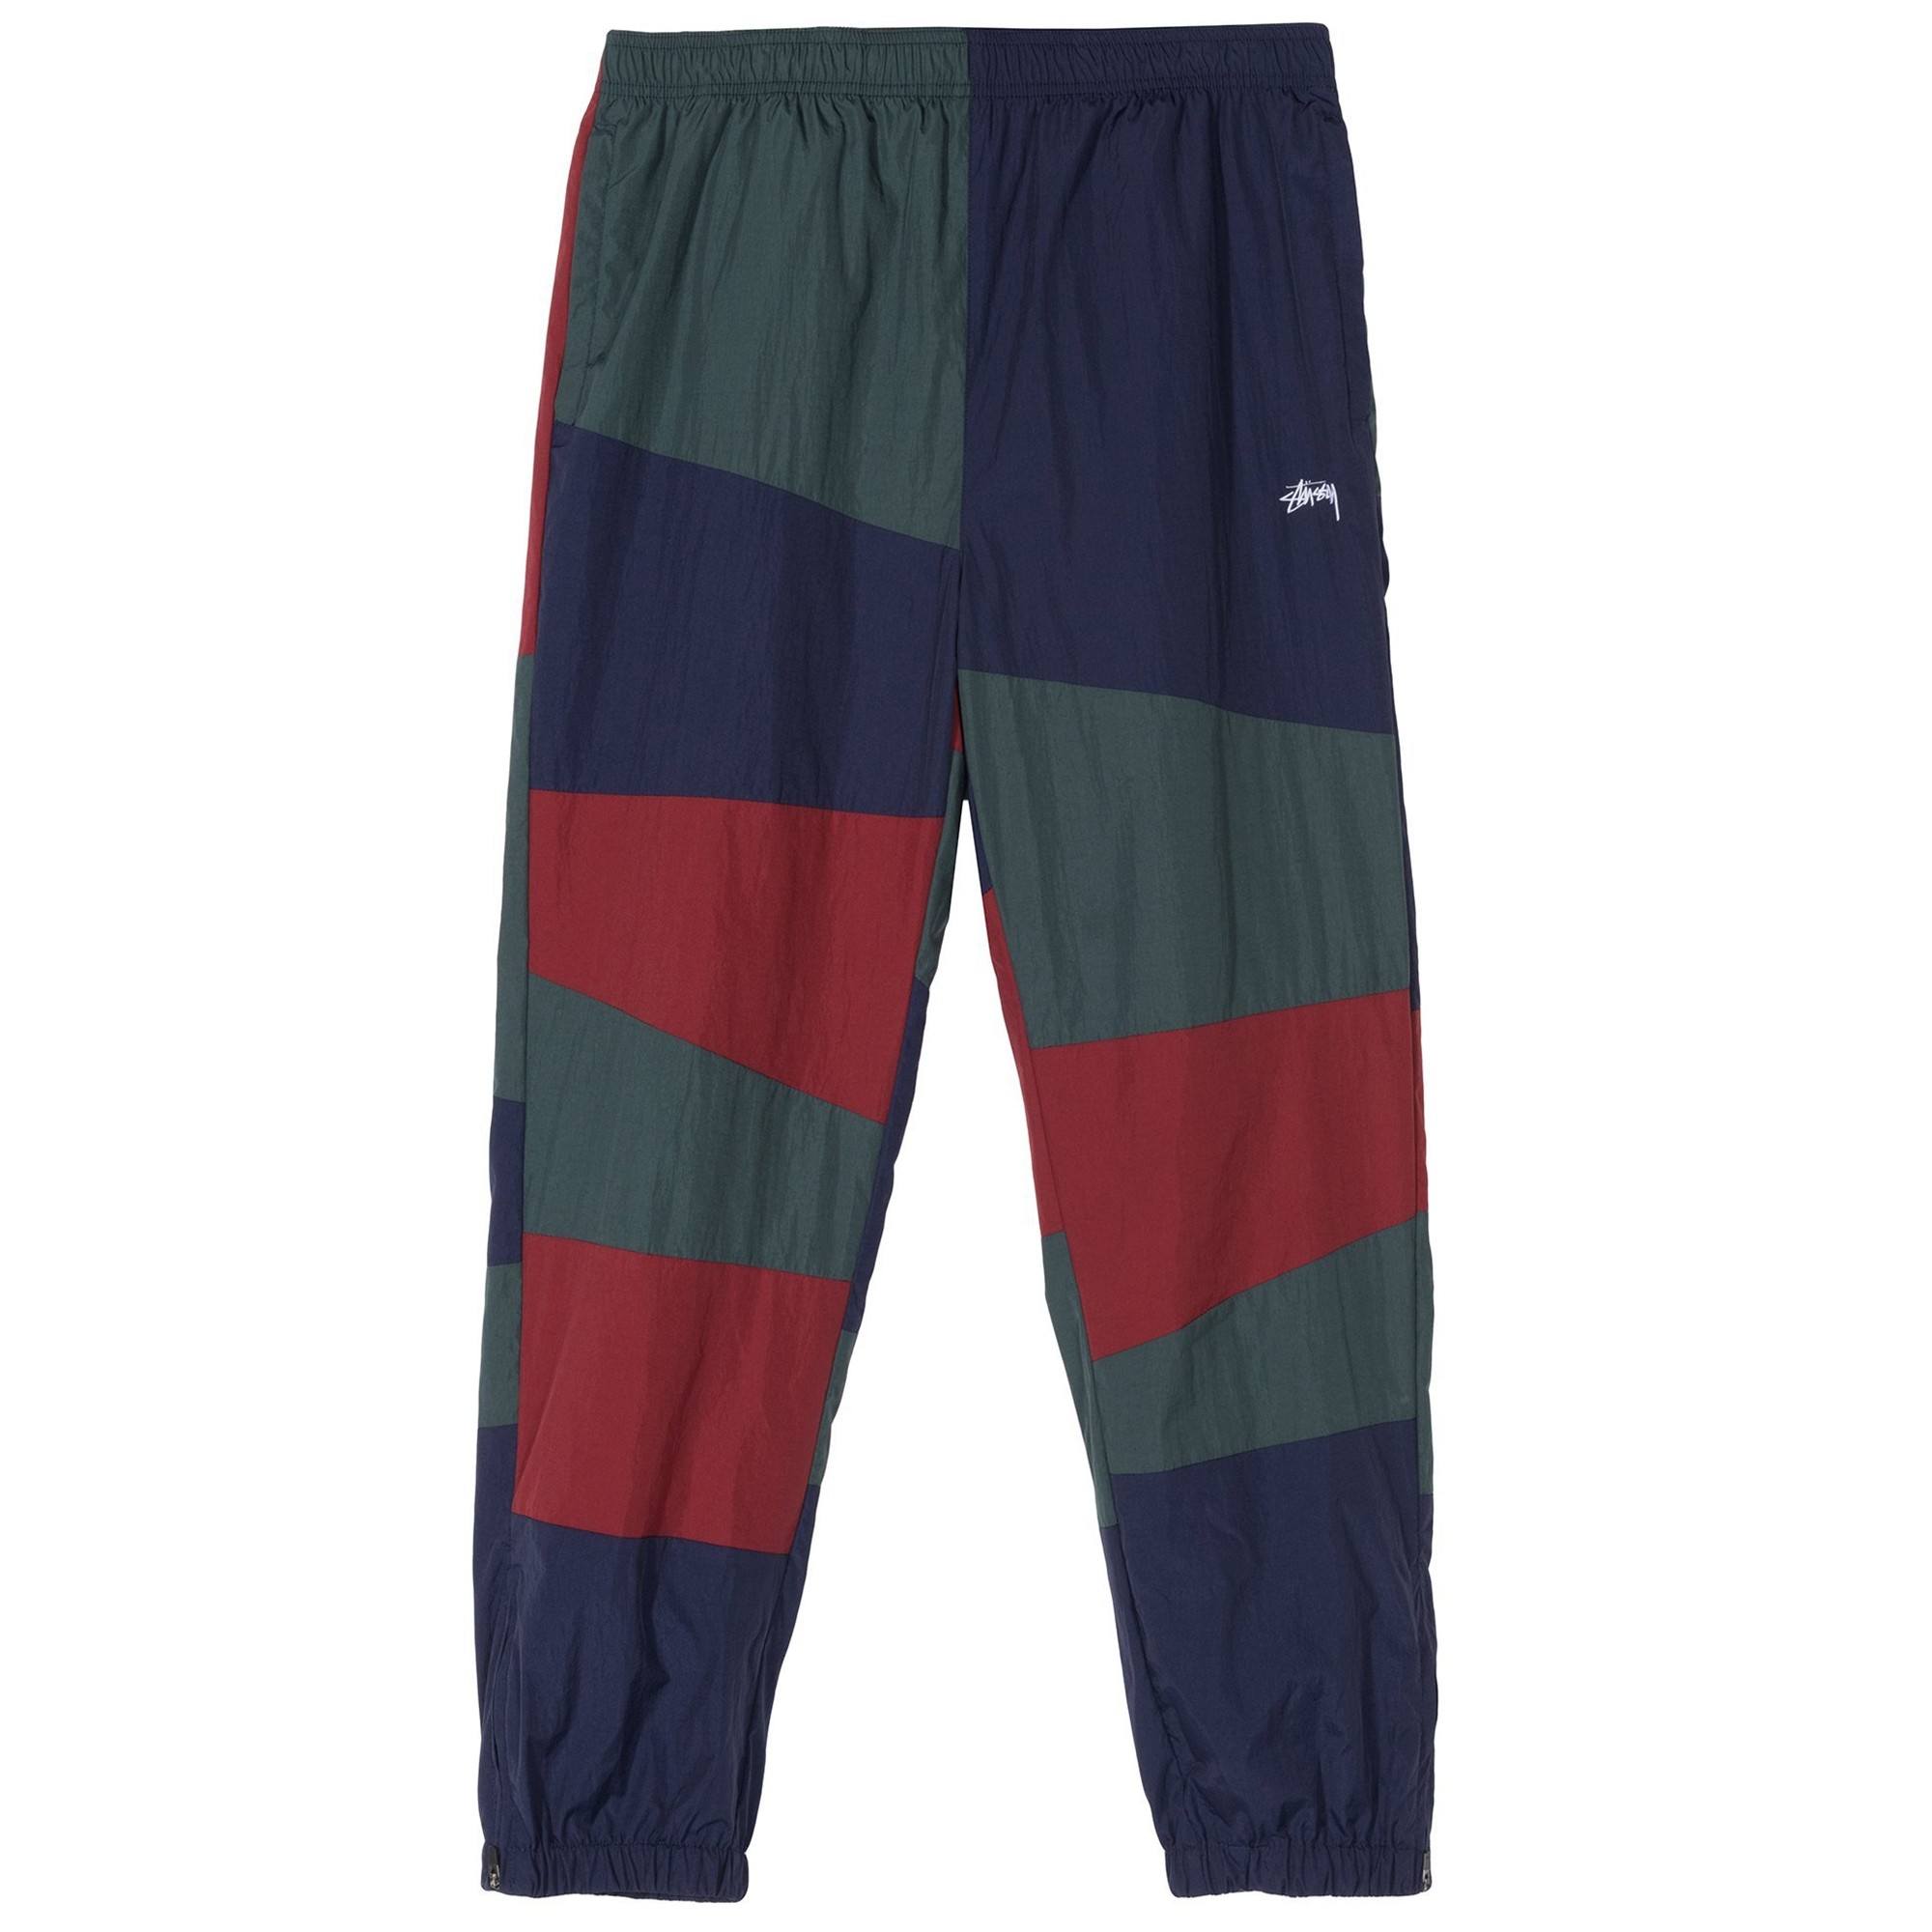 Stussy Panel Track Pant (Navy) - 116392 NVY - Consortium